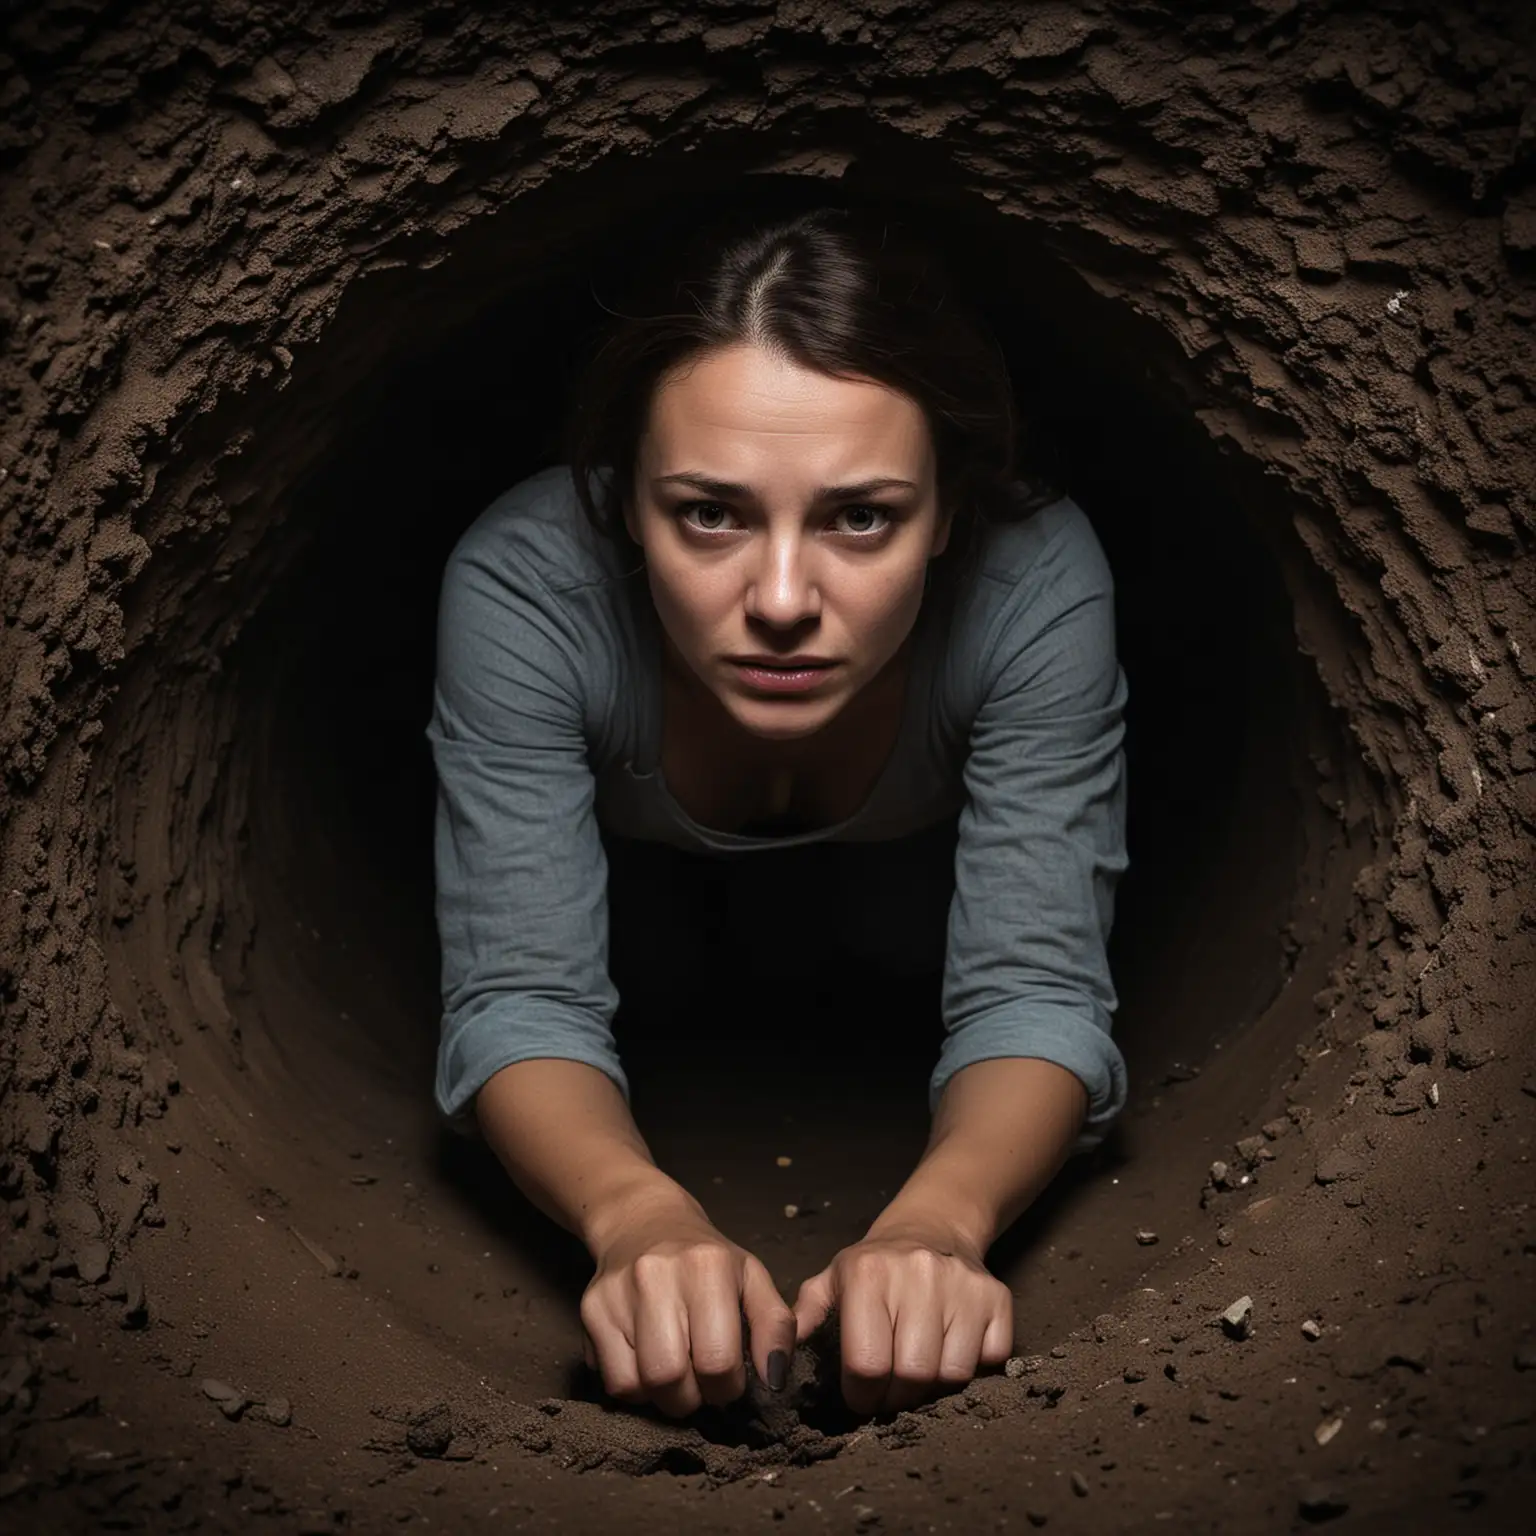 Woman Crouching in Mysterious Dark Abyss